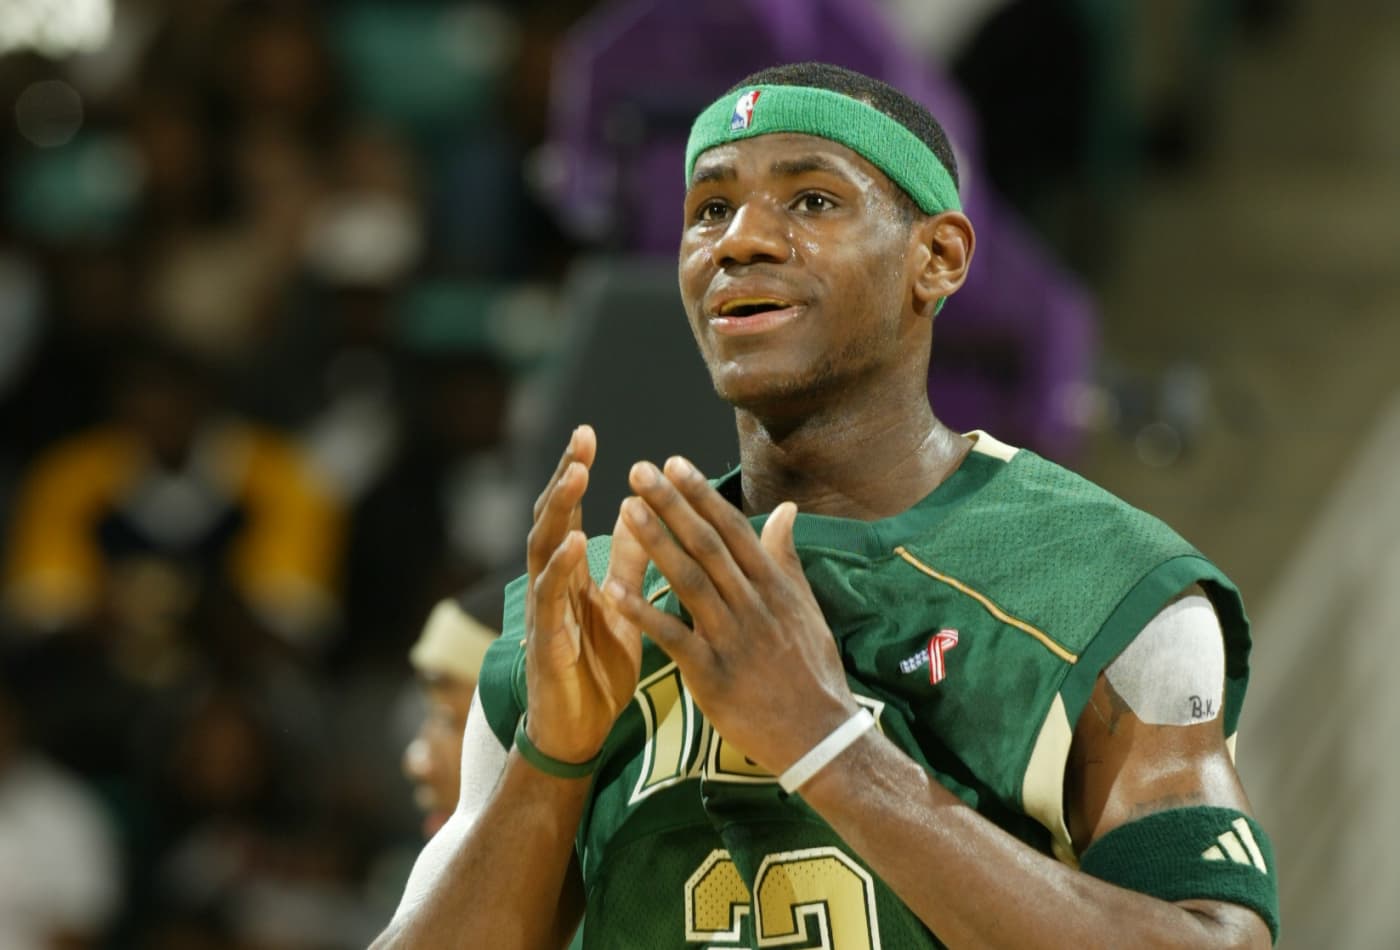 LeBron James turned down $10 million check when he was 18